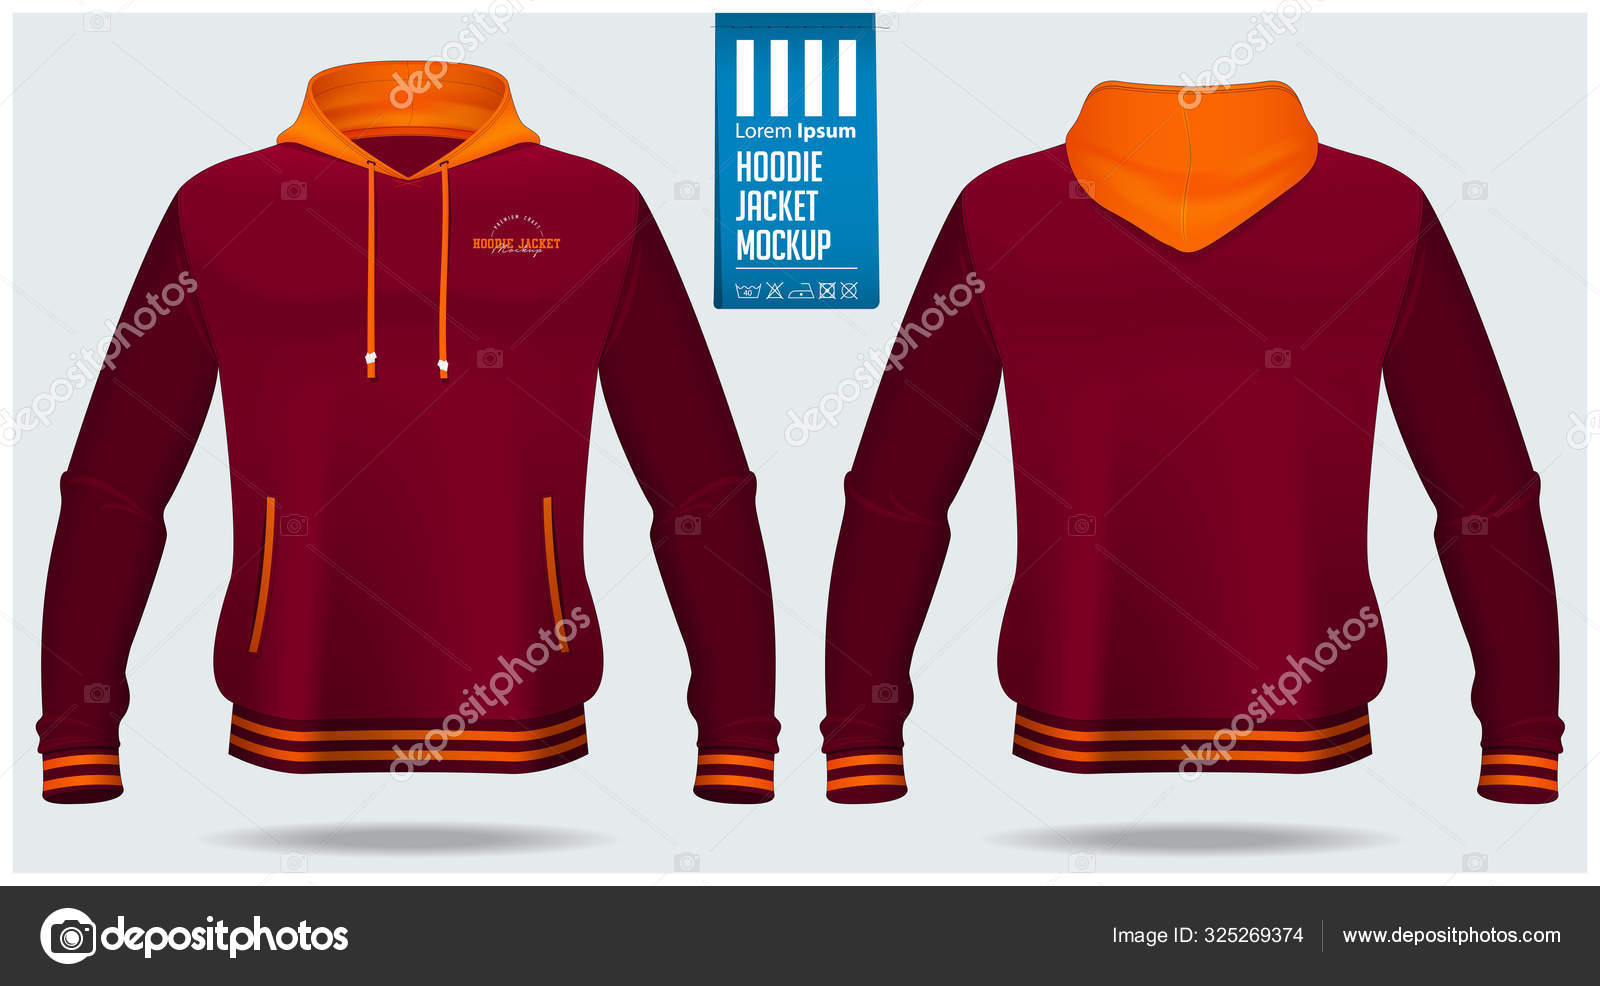 Download Hoodie Jacket Mockup Template Design For Soccer Football Baseball Basketball Sports Team Or University Front View And Back View For Jacket Uniform Vector Vector Image By C Tond Ruangwit Gmail Com Vector Stock